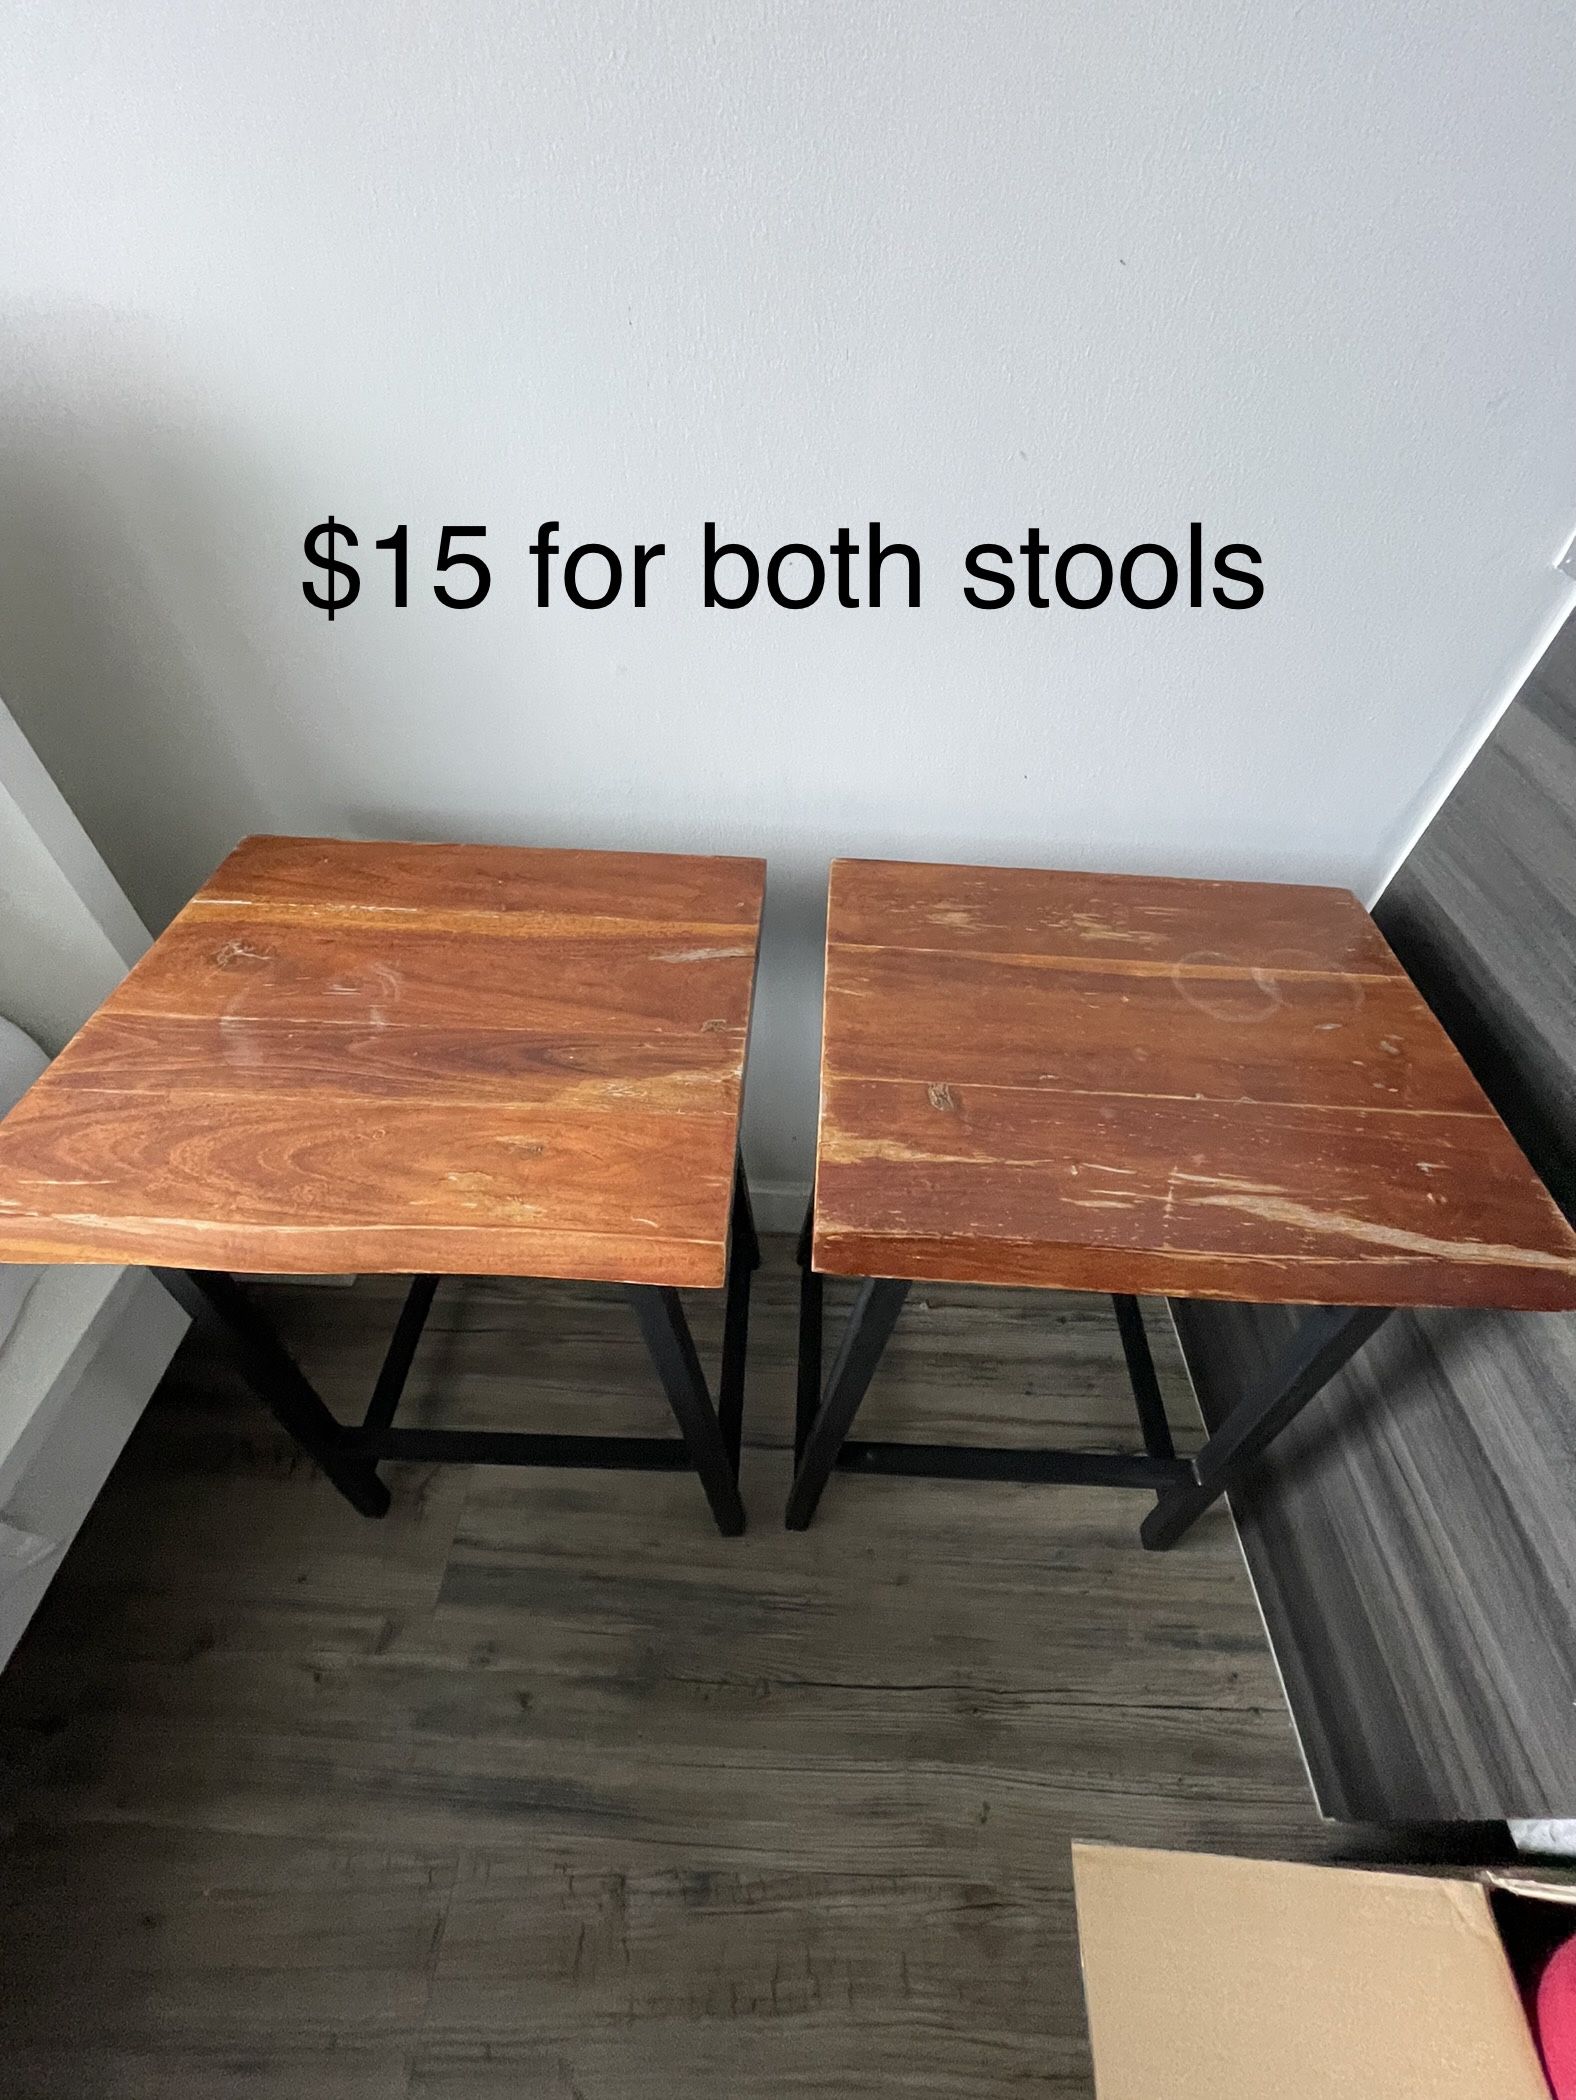 Two Wooden Stools